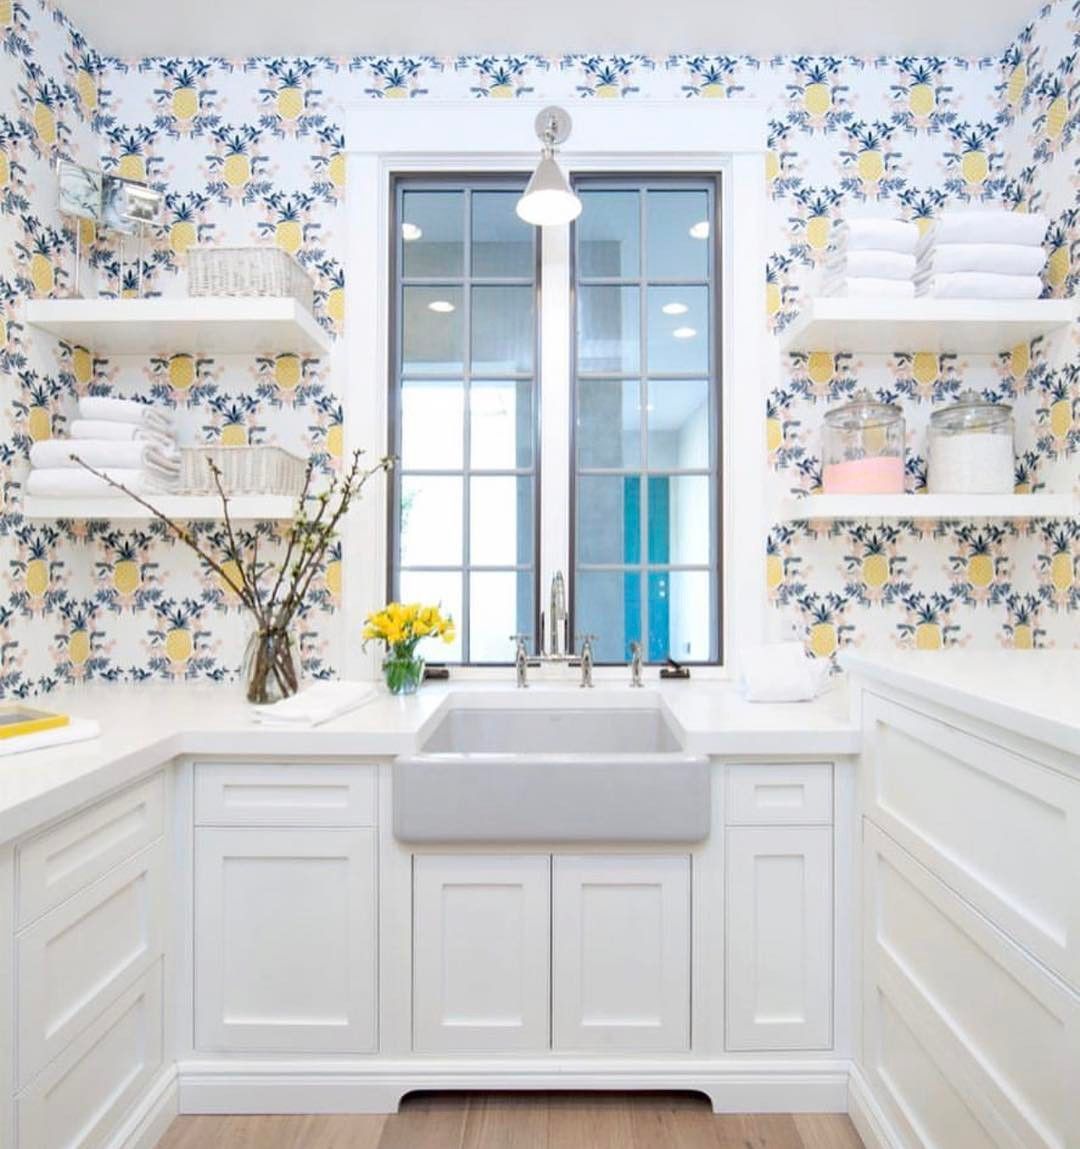 This Laundry Room Featuring Pineapple Sorbet Is Our Happy Place